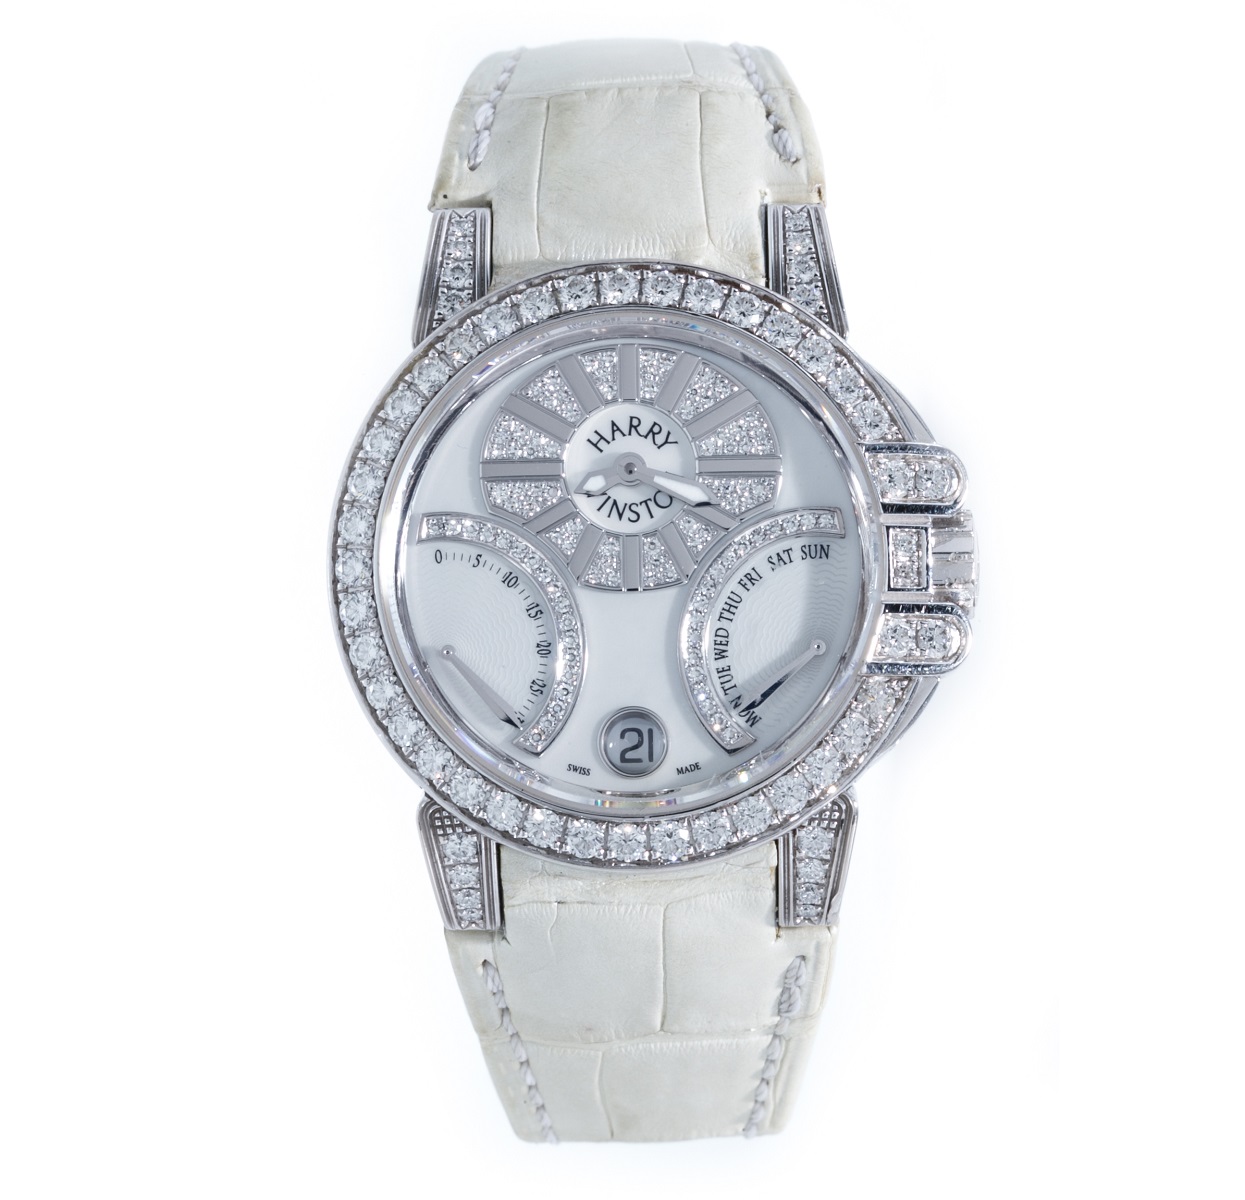 Ocean Collection Chronograph 36mm Automatic in White Gold with Diamonds Bezel on White Alligator Leather Strap with MOP Diamond Dial